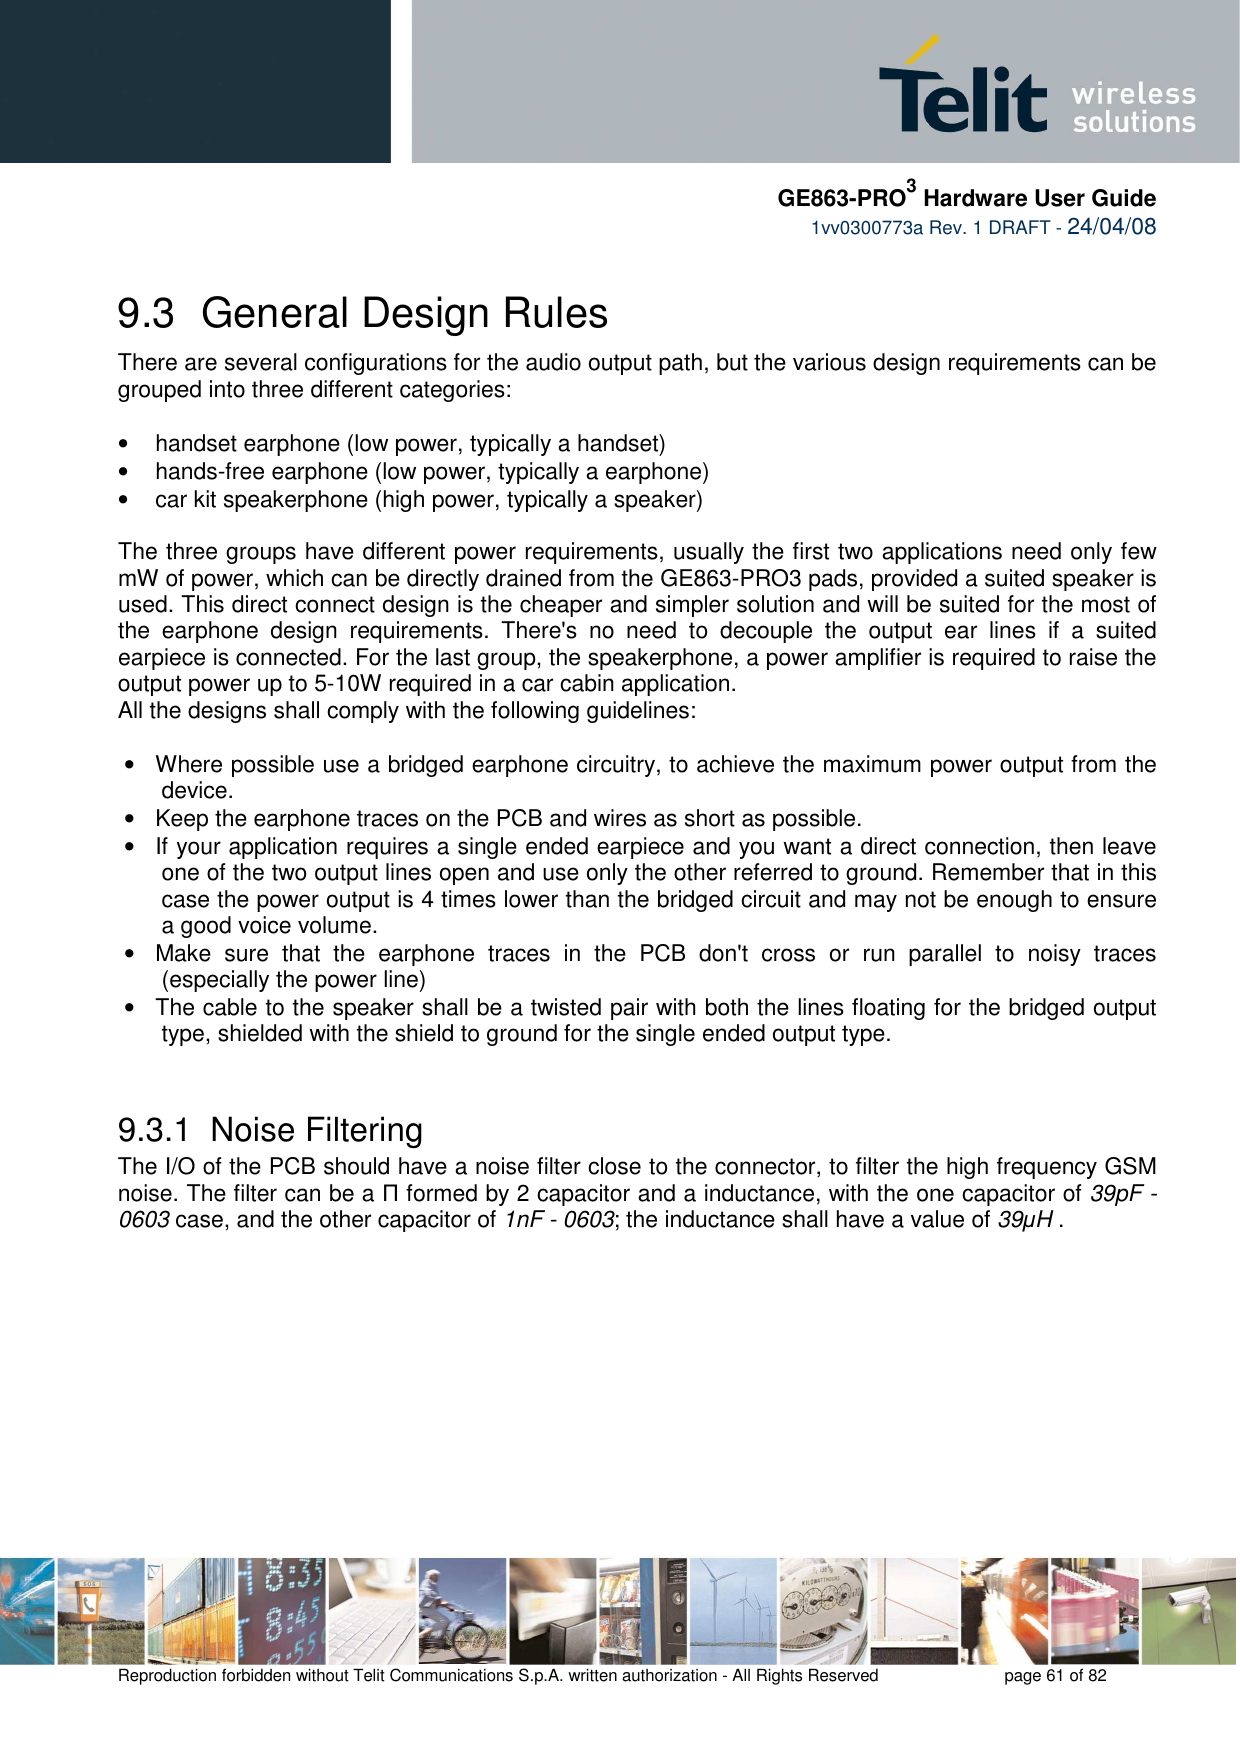     GE863-PRO3 Hardware User Guide  1vv0300773a Rev. 1 DRAFT - 24/04/08    Reproduction forbidden without Telit Communications S.p.A. written authorization - All Rights Reserved    page 61 of 82  9.3  General Design Rules There are several configurations for the audio output path, but the various design requirements can be grouped into three different categories:  •  handset earphone (low power, typically a handset) •  hands-free earphone (low power, typically a earphone) •  car kit speakerphone (high power, typically a speaker)   The three groups have different power requirements, usually the first two applications need only few mW of power, which can be directly drained from the GE863-PRO3 pads, provided a suited speaker is used. This direct connect design is the cheaper and simpler solution and will be suited for the most of the  earphone  design  requirements.  There&apos;s  no  need  to  decouple  the  output  ear  lines  if  a  suited earpiece is connected. For the last group, the speakerphone, a power amplifier is required to raise the output power up to 5-10W required in a car cabin application. All the designs shall comply with the following guidelines:  •  Where possible use a bridged earphone circuitry, to achieve the maximum power output from the device. •  Keep the earphone traces on the PCB and wires as short as possible. •  If your application requires a single ended earpiece and you want a direct connection, then leave one of the two output lines open and use only the other referred to ground. Remember that in this case the power output is 4 times lower than the bridged circuit and may not be enough to ensure a good voice volume.  •  Make  sure  that  the  earphone  traces  in  the  PCB  don&apos;t  cross  or  run  parallel  to  noisy  traces (especially the power line)  •  The cable to the speaker shall be a twisted pair with both the lines floating for the bridged output type, shielded with the shield to ground for the single ended output type.  9.3.1  Noise Filtering The I/O of the PCB should have a noise filter close to the connector, to filter the high frequency GSM noise. The filter can be a Π formed by 2 capacitor and a inductance, with the one capacitor of 39pF - 0603 case, and the other capacitor of 1nF - 0603; the inductance shall have a value of 39µH . 